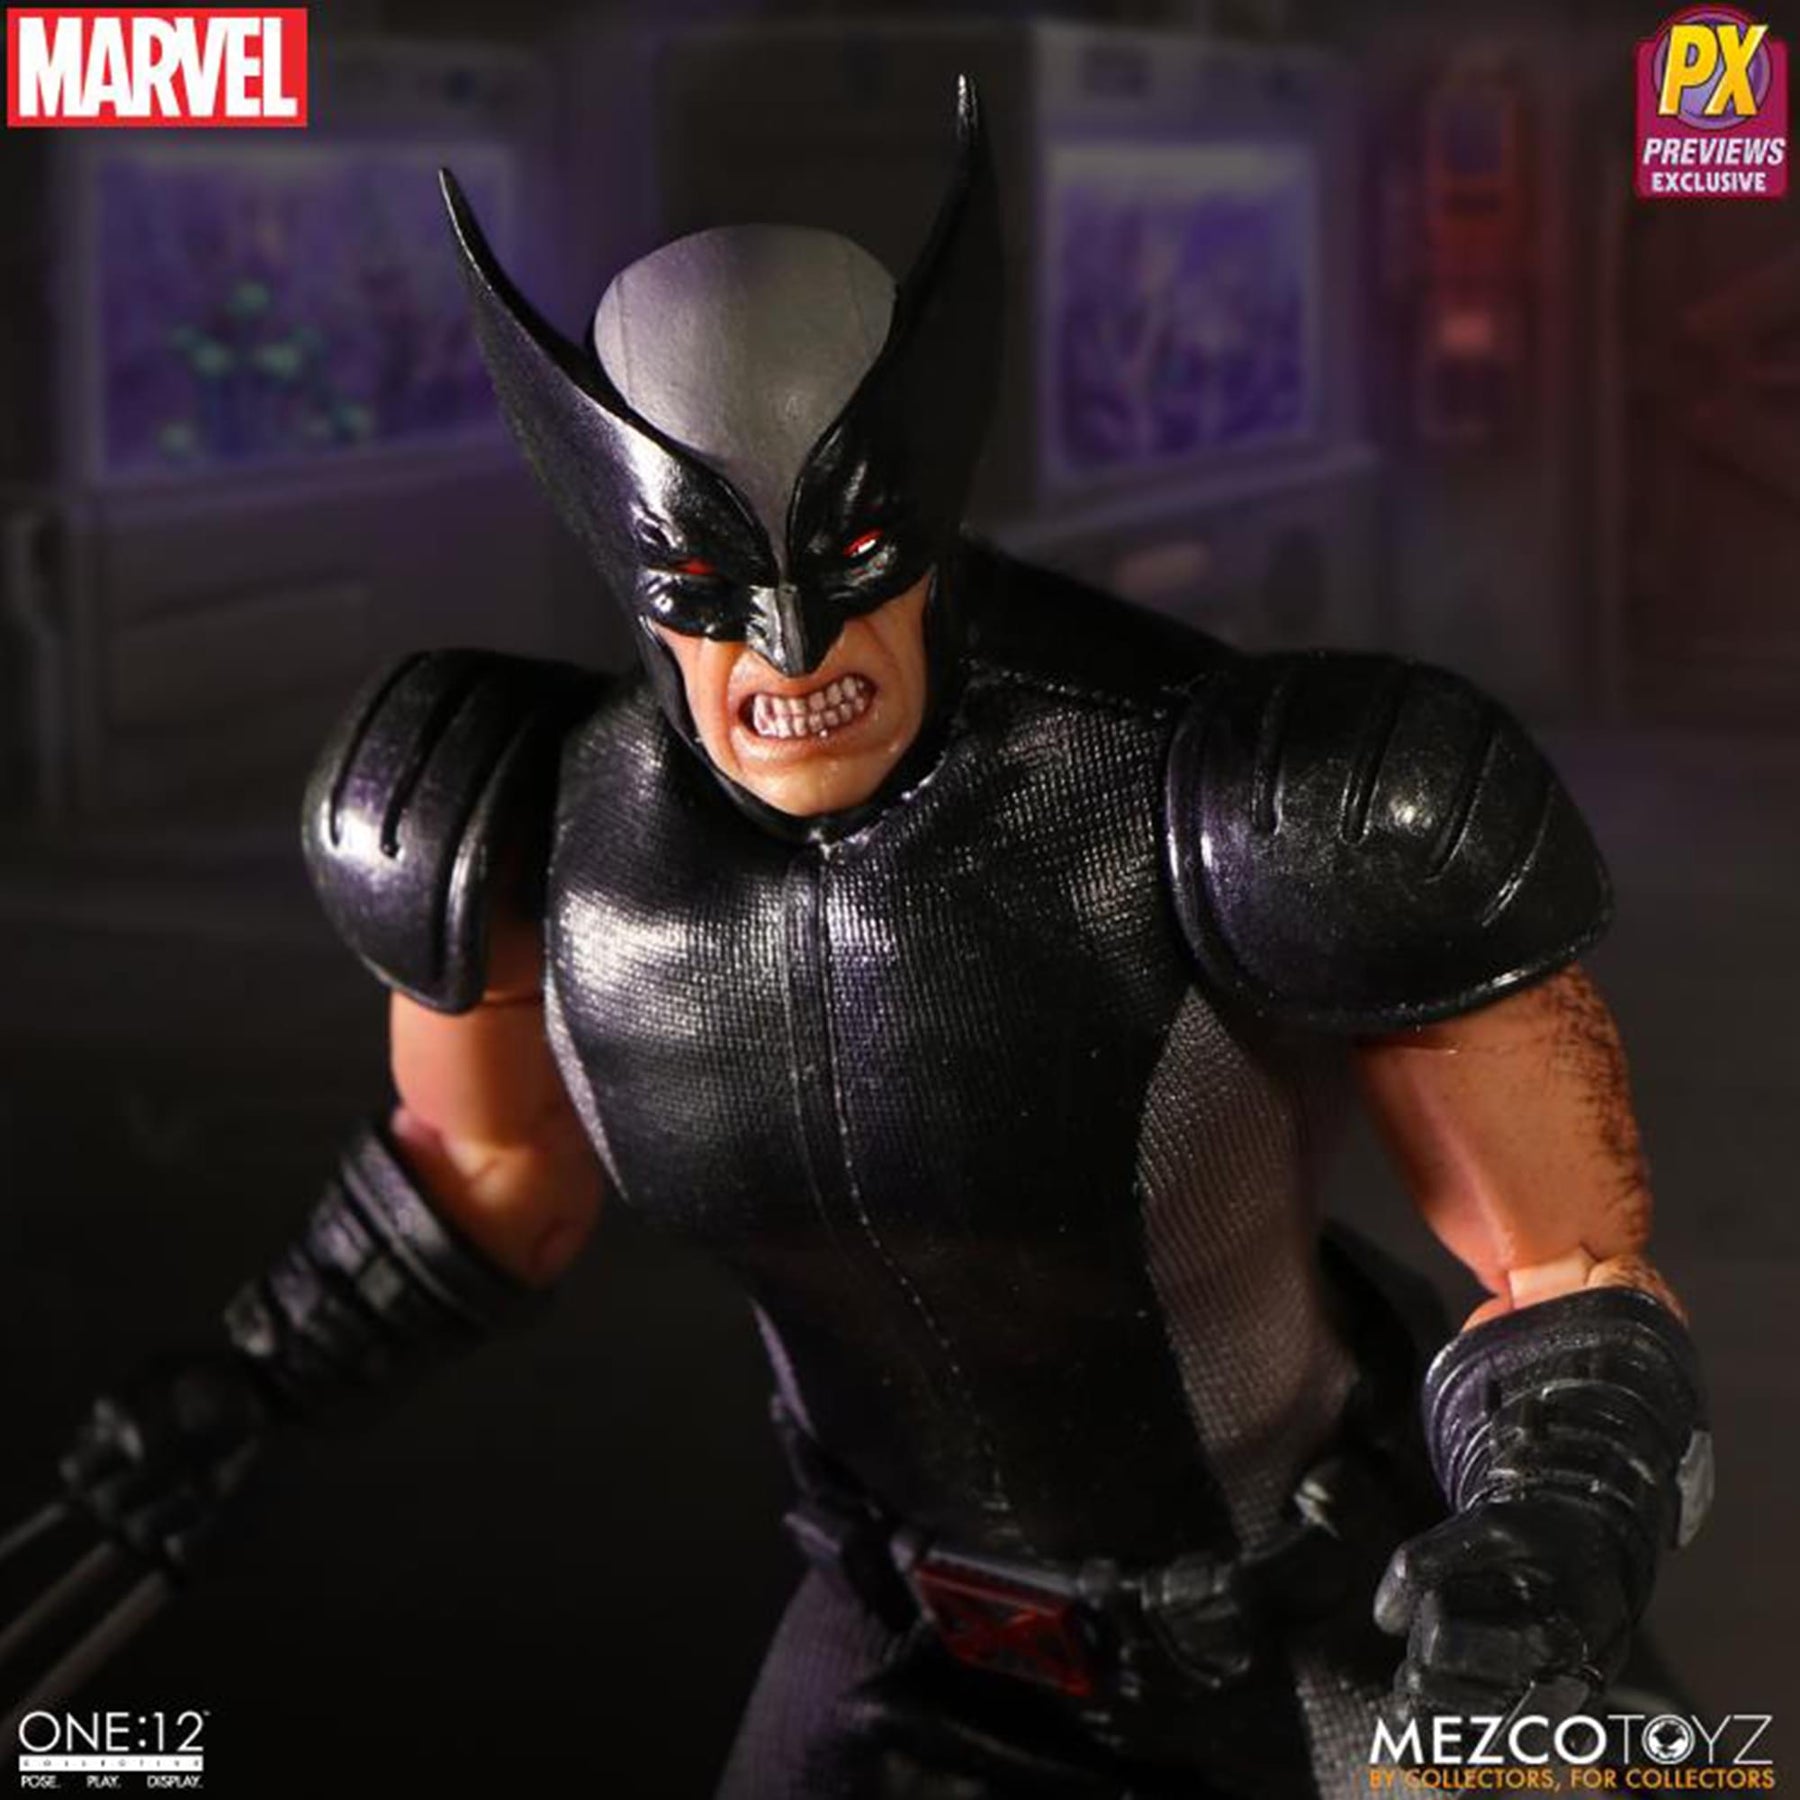 Marvel One:12 Collective 6" X-Force Wolverine Action Figure, Previews Exclusive